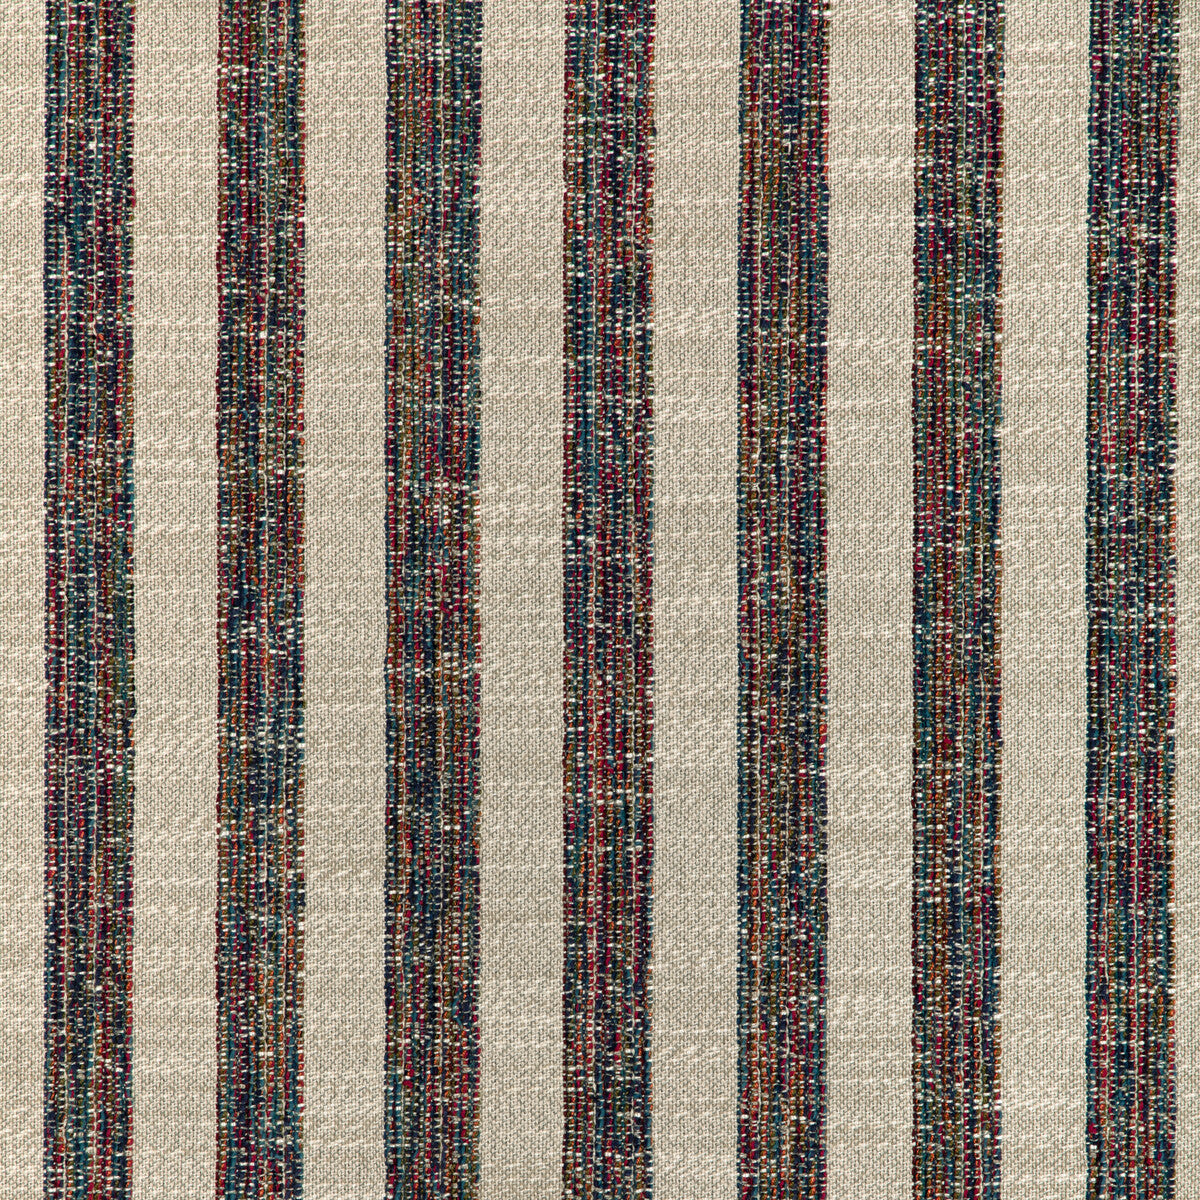 Kravet Design fabric in 37150-519 color - pattern 37150.519.0 - by Kravet Design in the Woven Colors collection